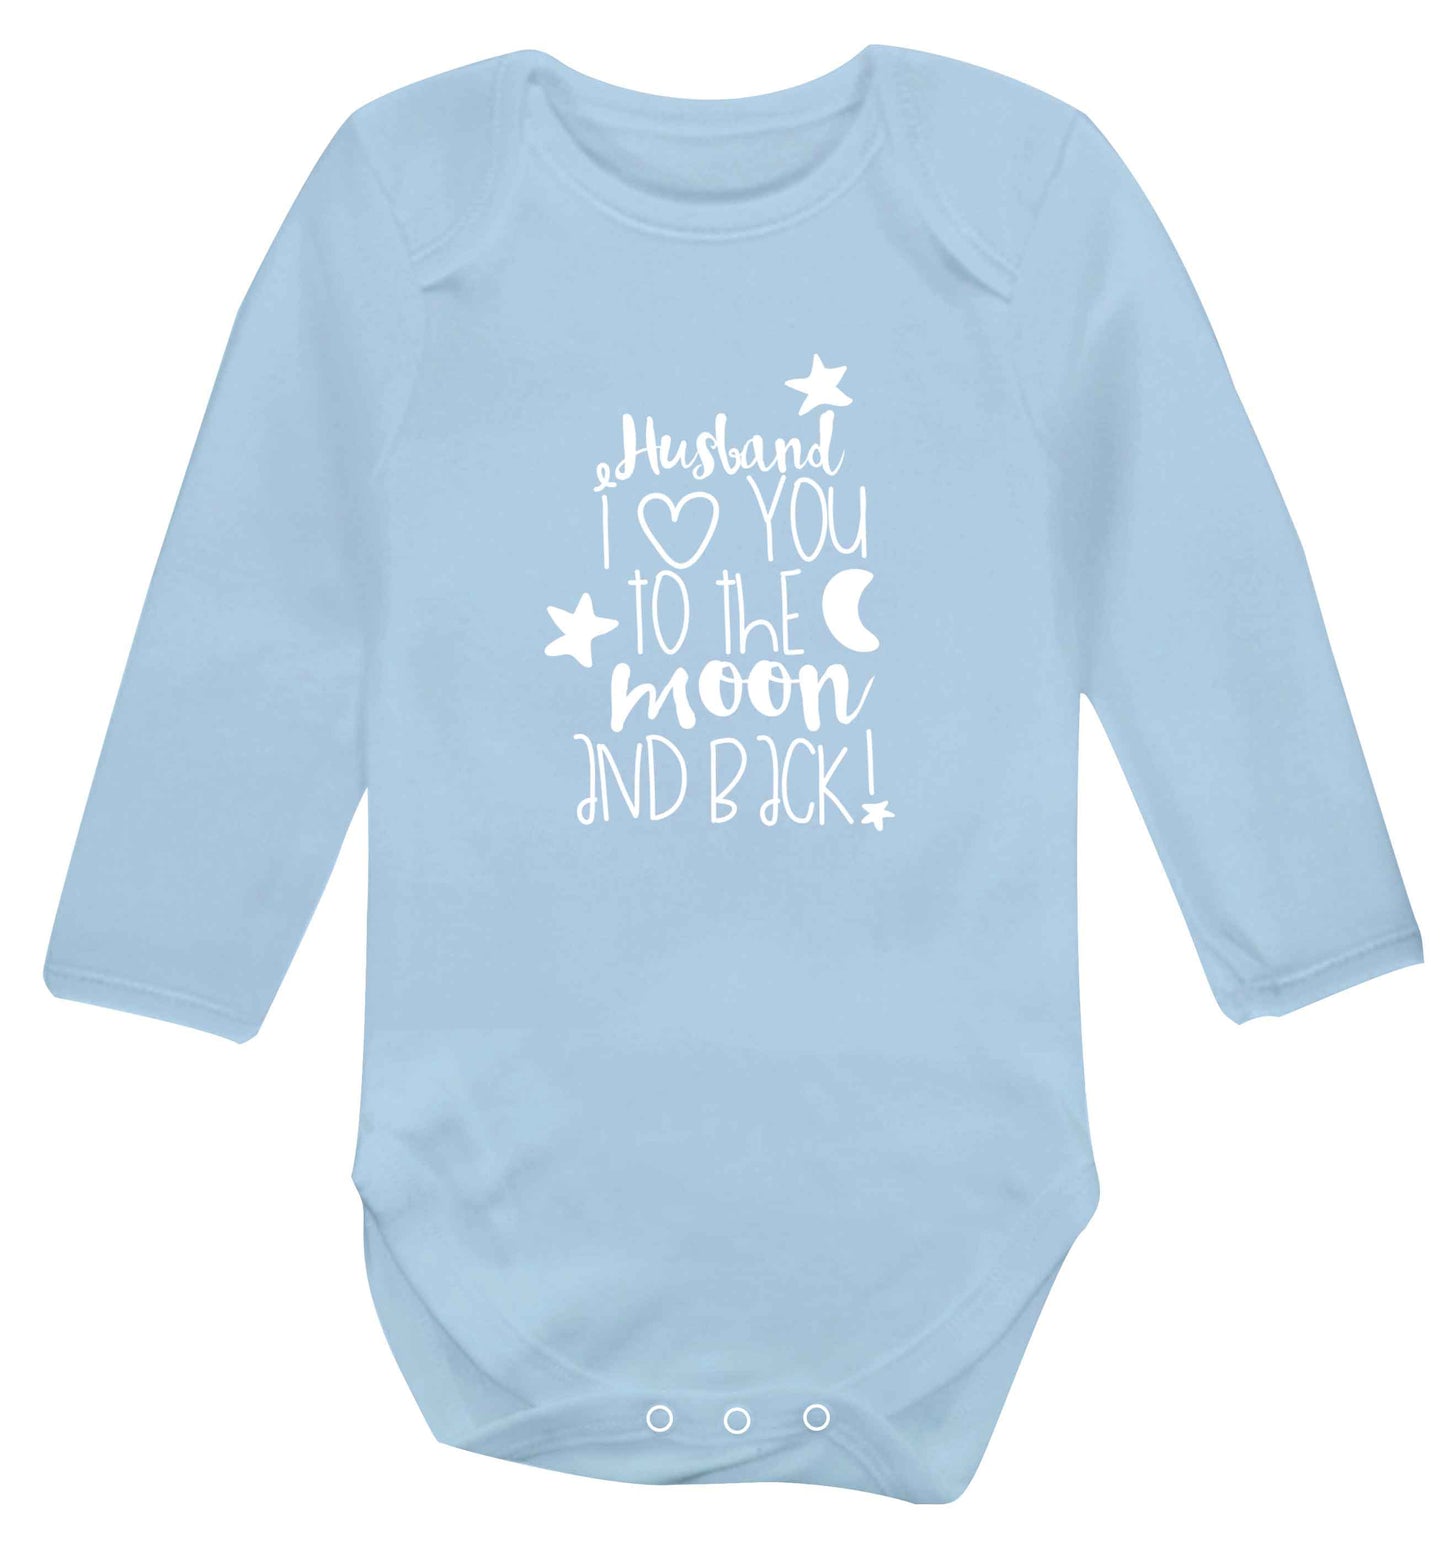 Husband I love you to the moon and back baby vest long sleeved pale blue 6-12 months